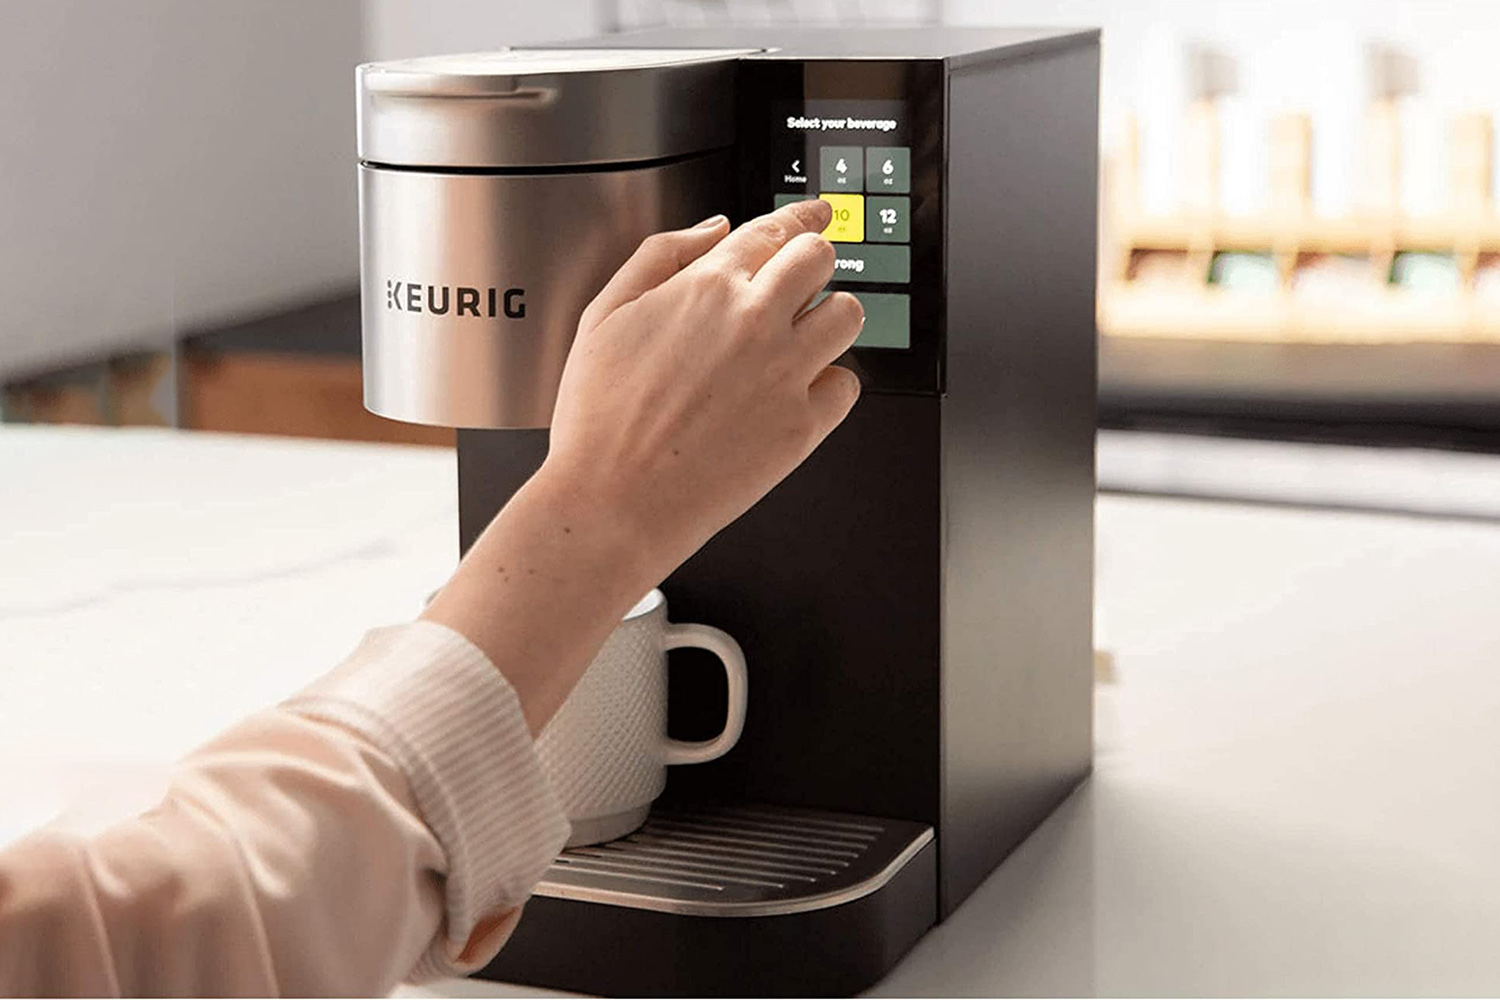 Black Friday 2021: The best Keurig and K-Cup deals you can still shop